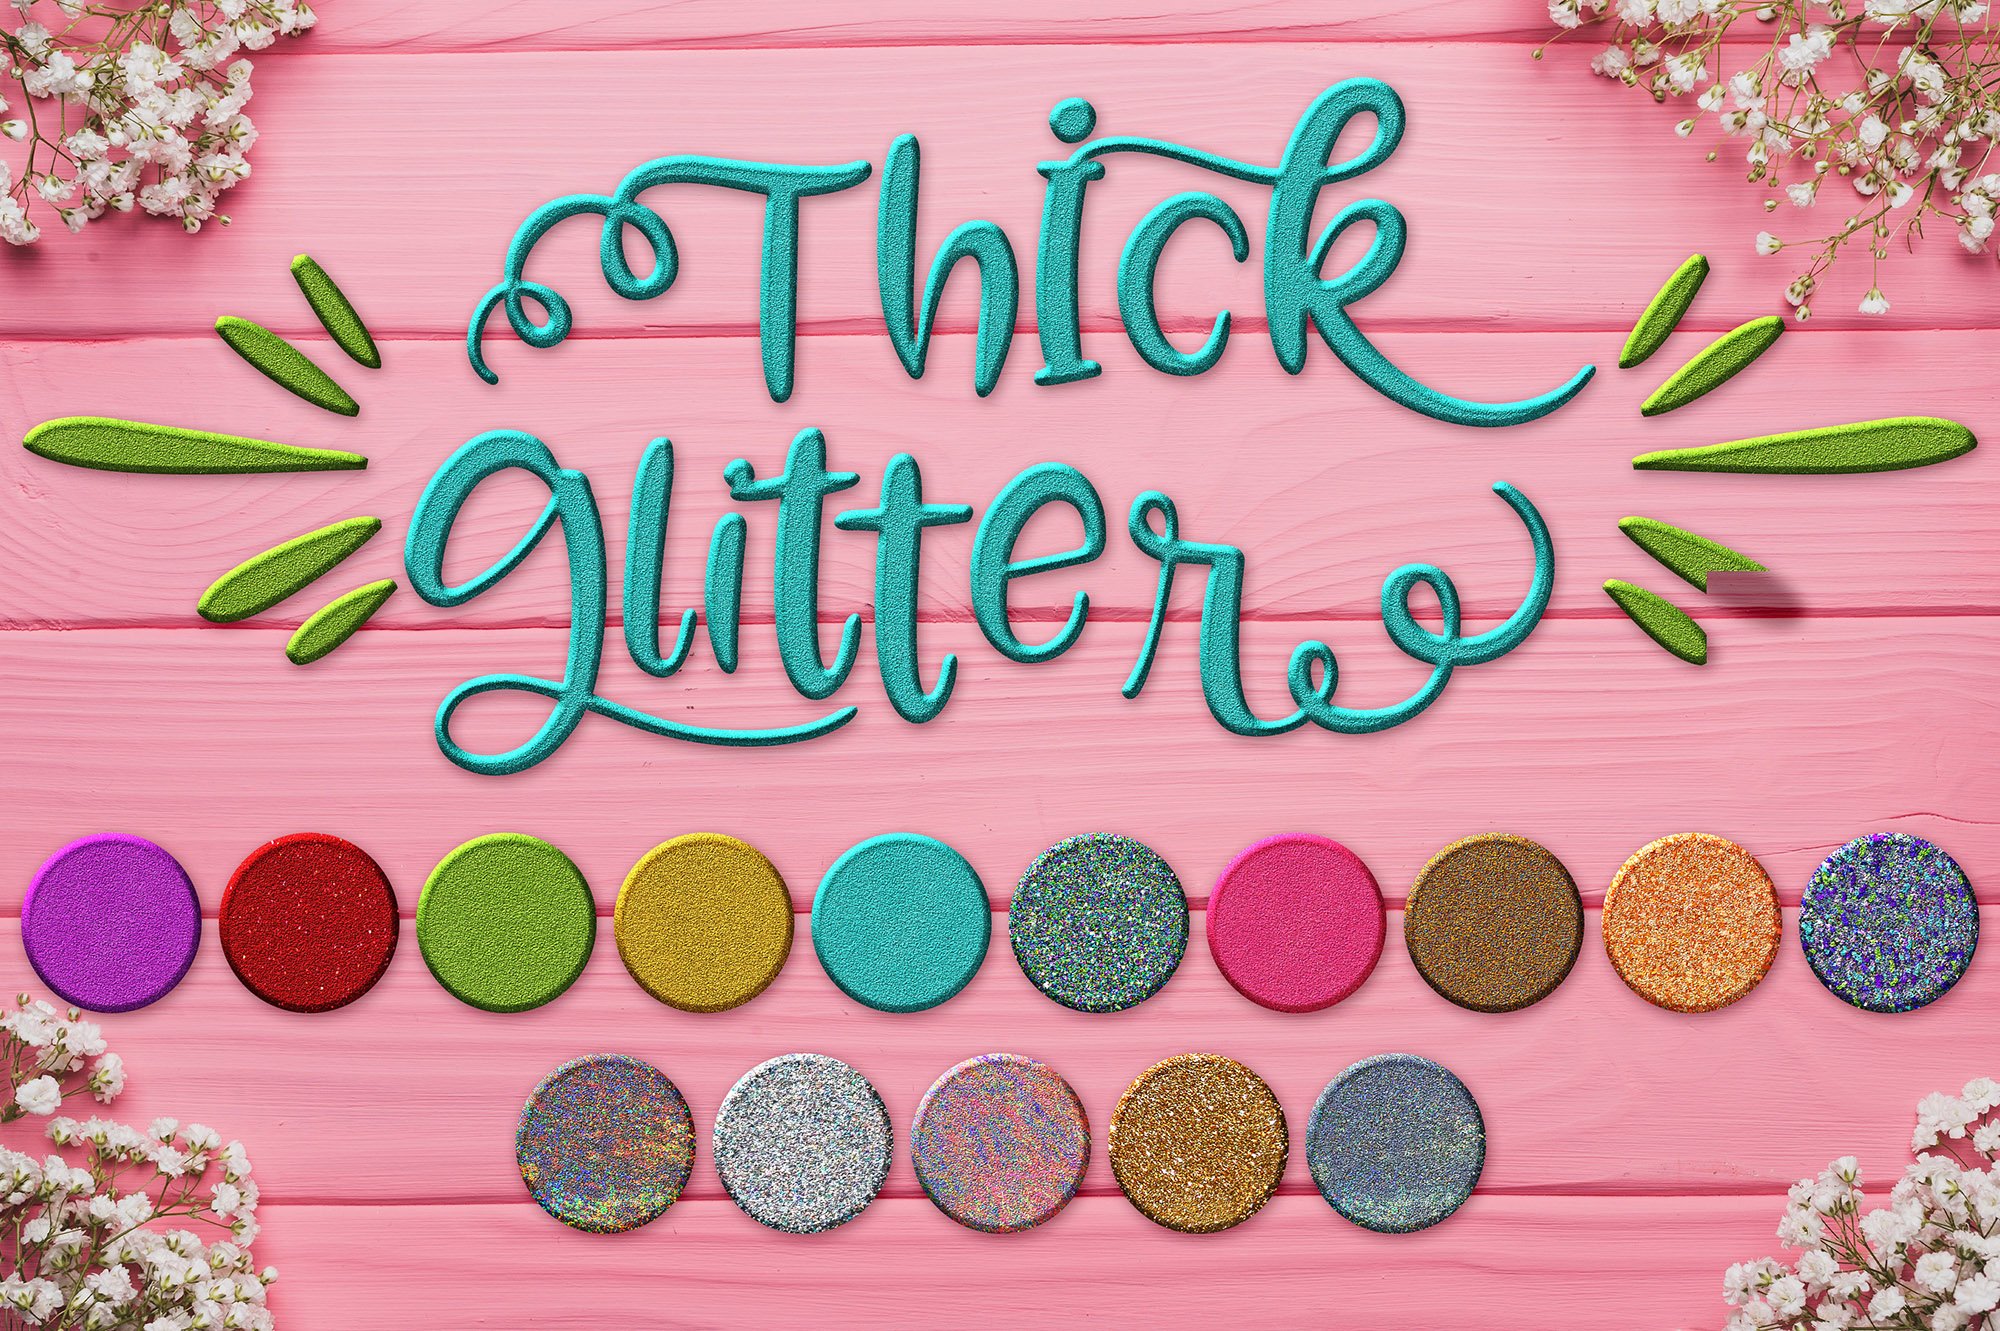 hg preview thickglitter 298